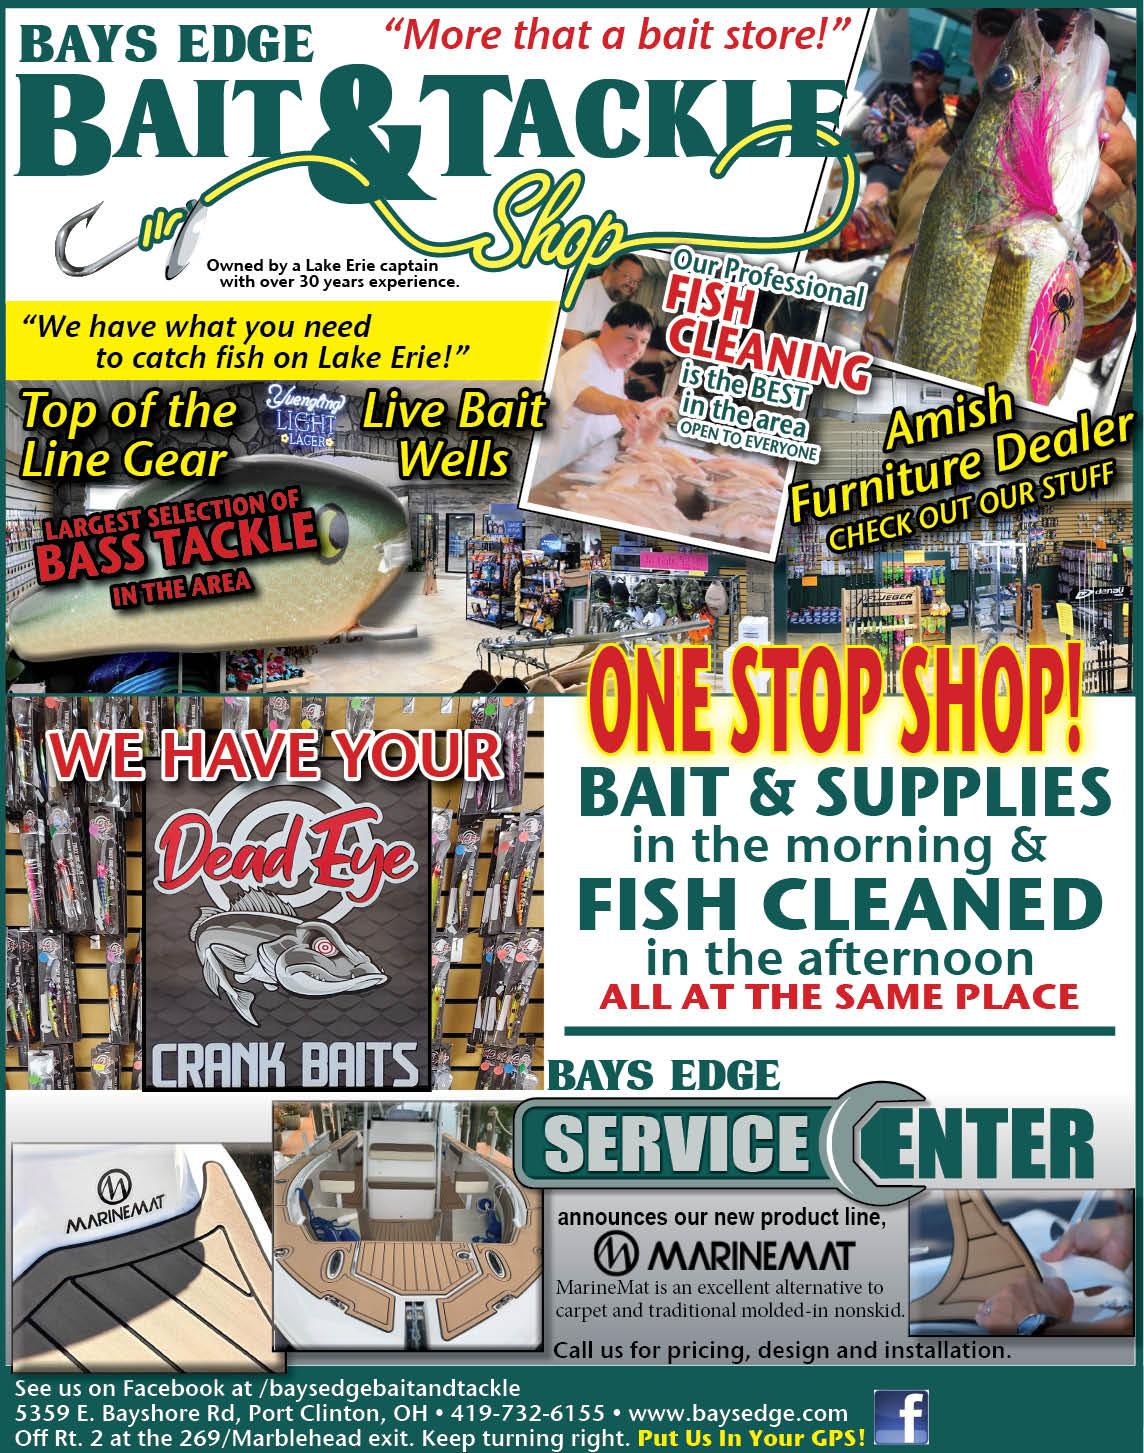 Bays Edge Bait & Tackle Shop - Lake Erie Restaurant and Entertainment Guide